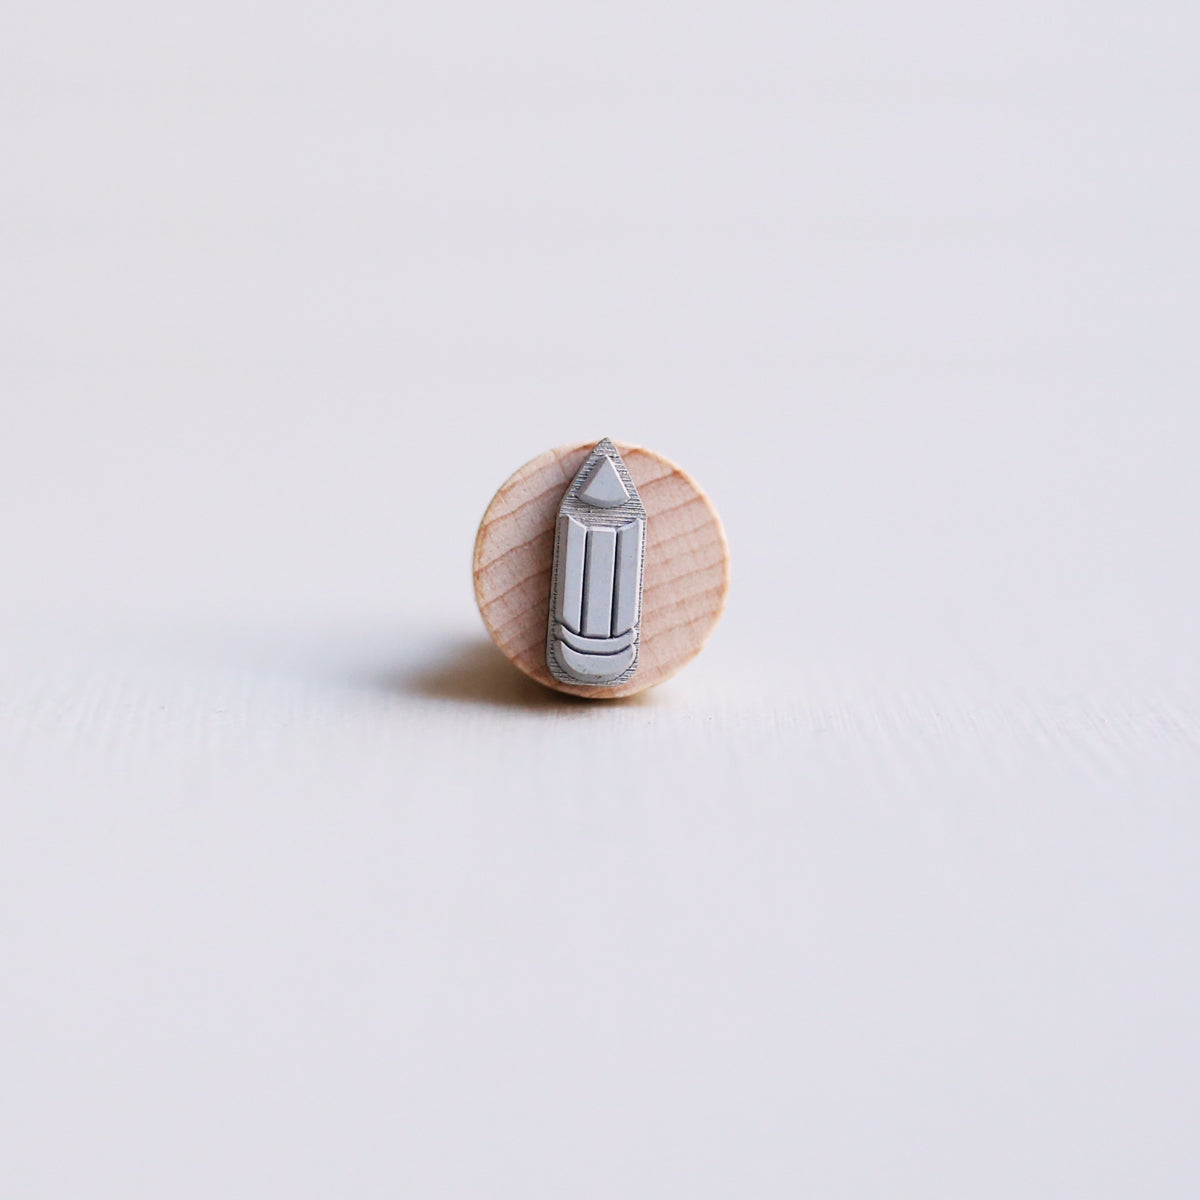 RUBBER STAMP // PENCIL